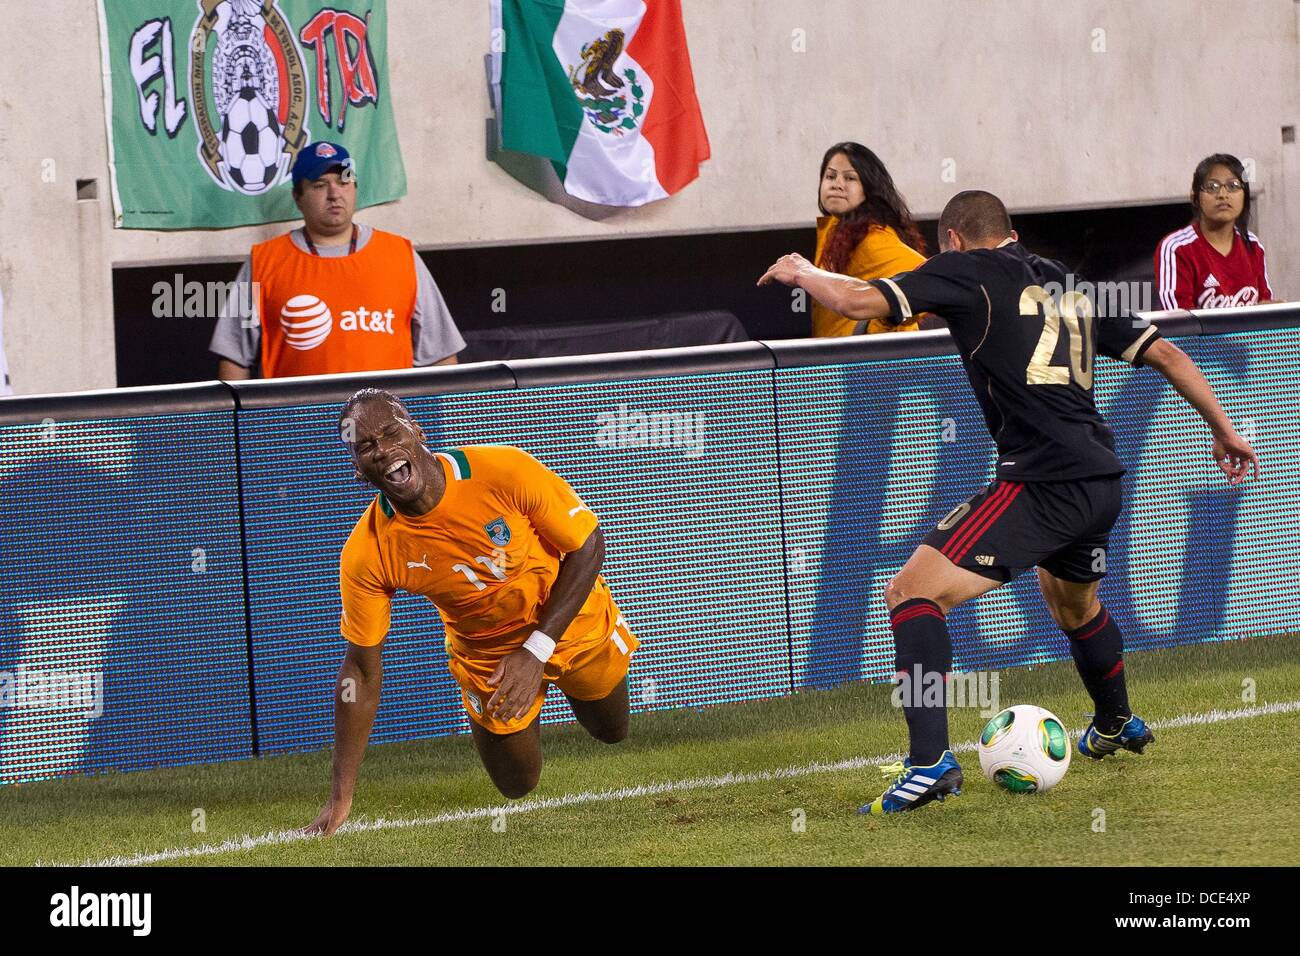 East Rutherford, New Jersey, USA. 14th Aug, 2013. August 14, 2013: Ivory Coast forward Didier Drogba (11) falls to the ground and screams in frustration as Mexico defender Jorge Torres Nilo (20) settles the ball during the International friendly match between Mexico and Ivory Coast at Met Life Stadium, East Rutherford, NJ. Mexico defeated Ivory Coast 4-1. © csm/Alamy Live News Stock Photo